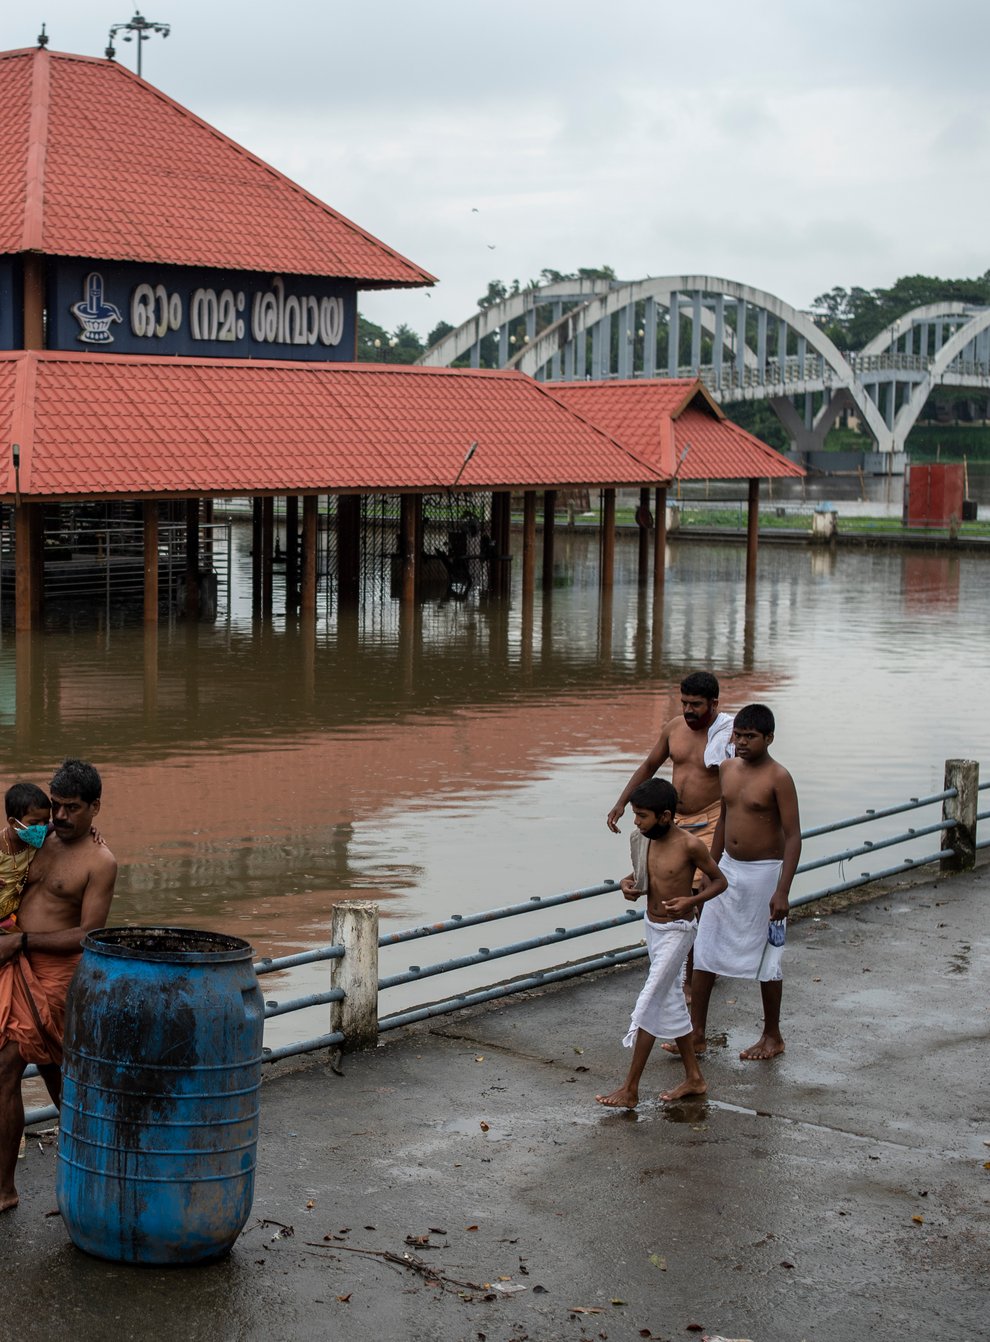 Hindu devotees walk back after performing rituals, past an inundated Shiva temple on the banks of the Periyar River following heavy rains in Kochi, Kerala state, India, Tuesday, Oct. 12, 2021. (AP Photo/R S Iyer)